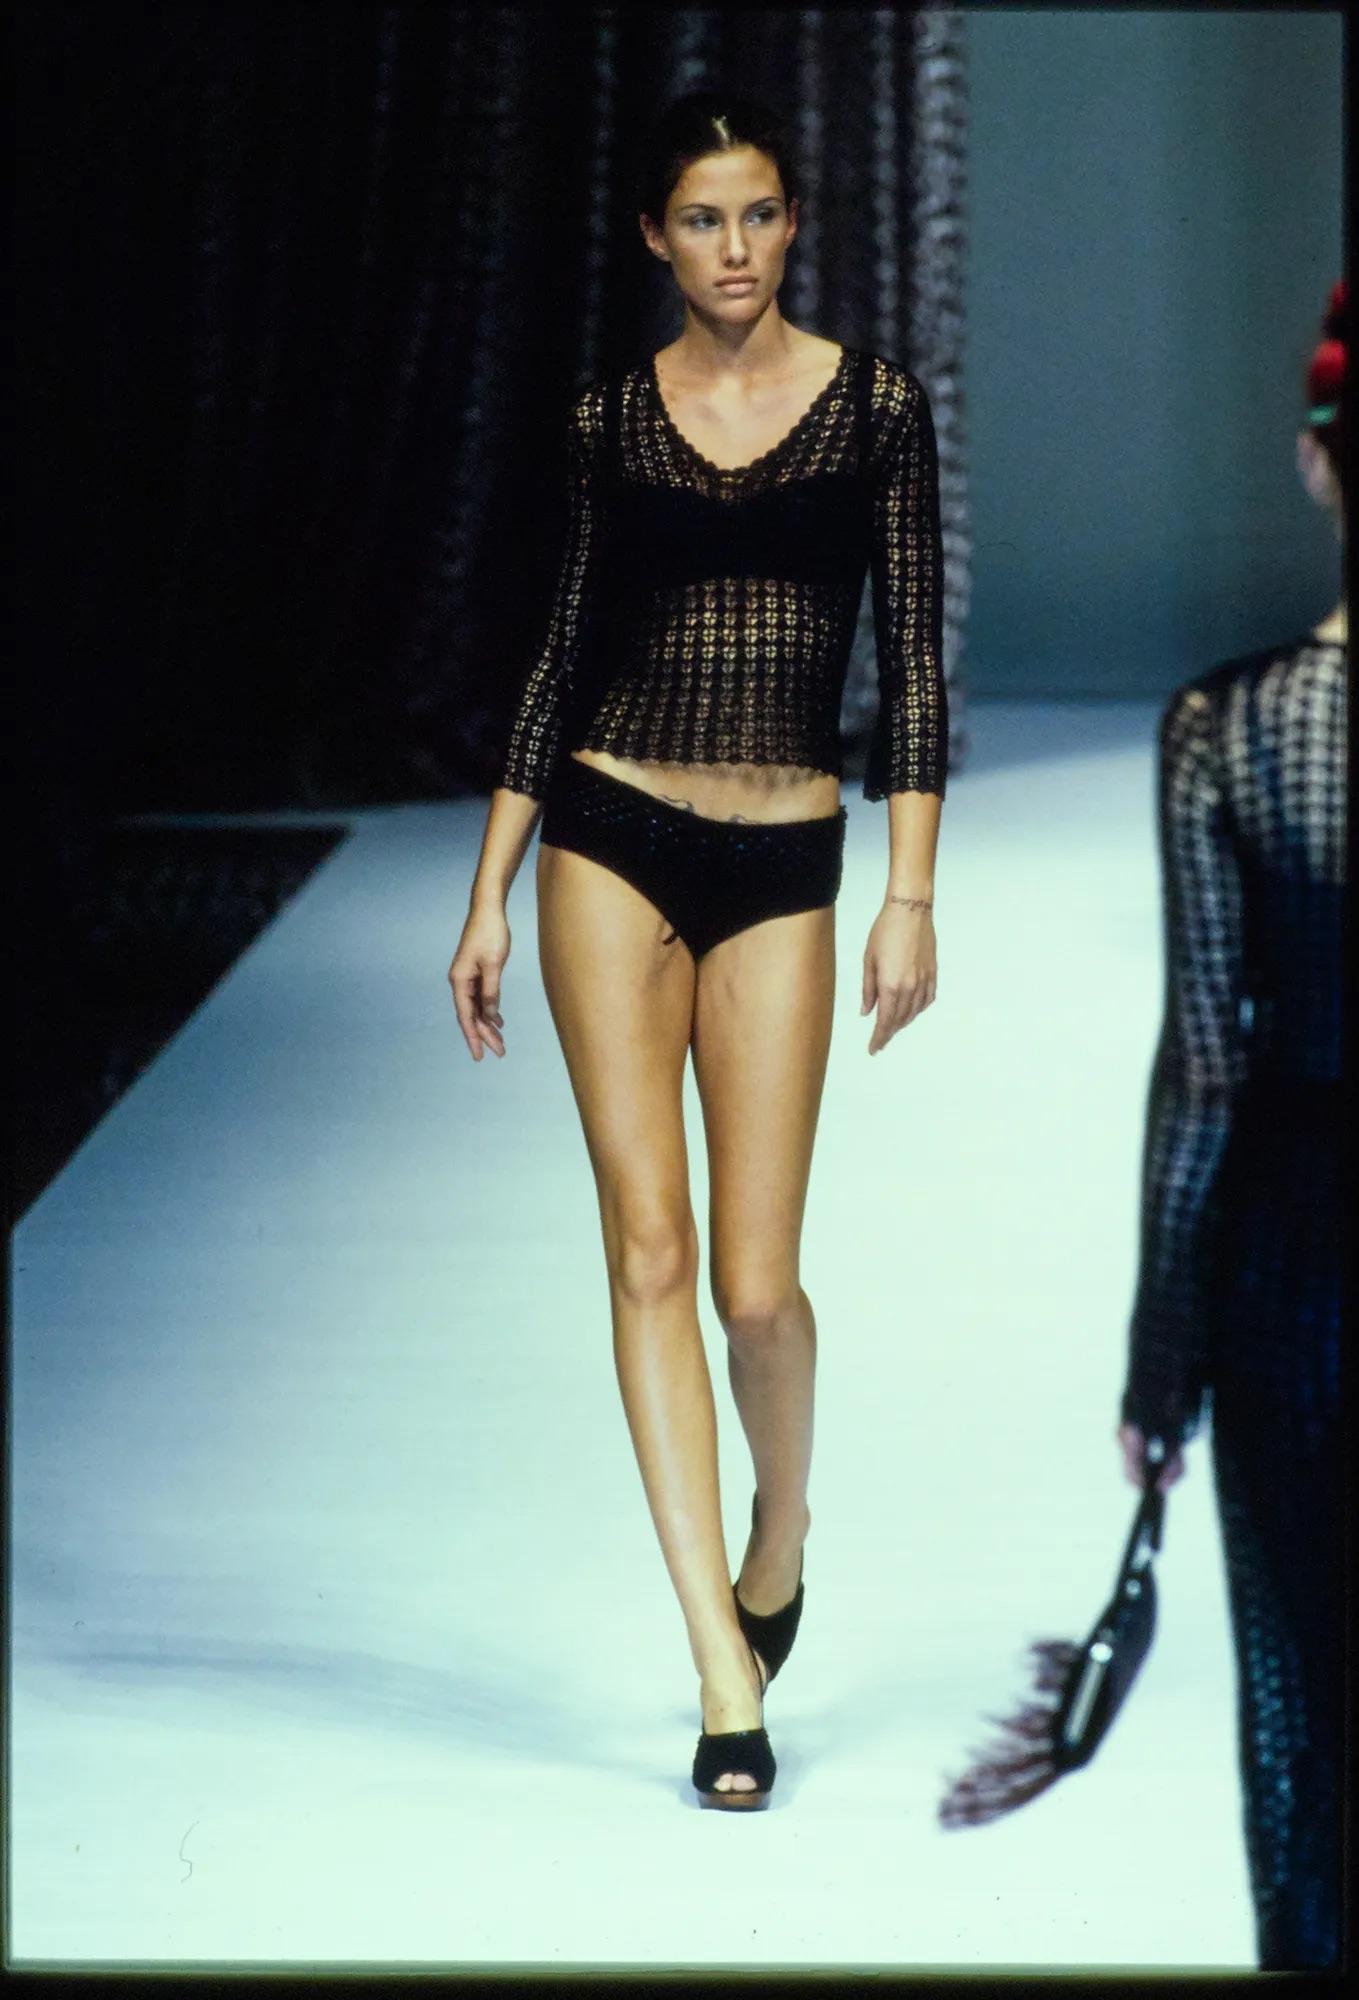 Presenting a gorgeous black crochet Dolce & Gabbana top. From the Spring/Summer 1997 collection, this top debuted in a variation of this crochet stitch pattern as part of look 9 on the season's runway. The top features a scoop neckline and is made